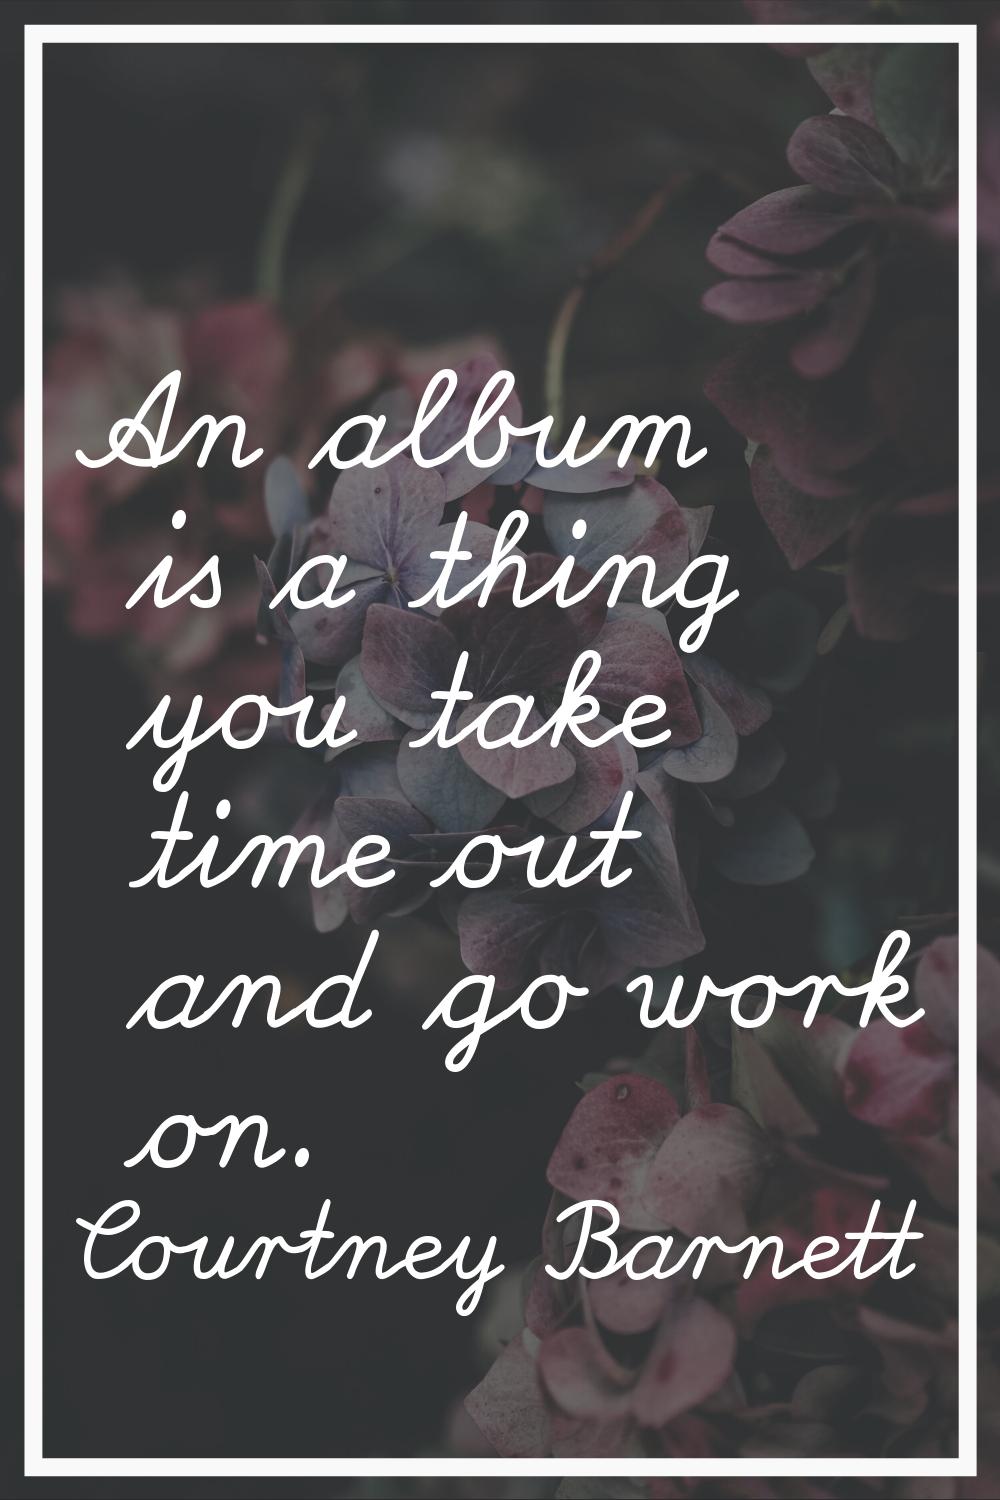 An album is a thing you take time out and go work on.